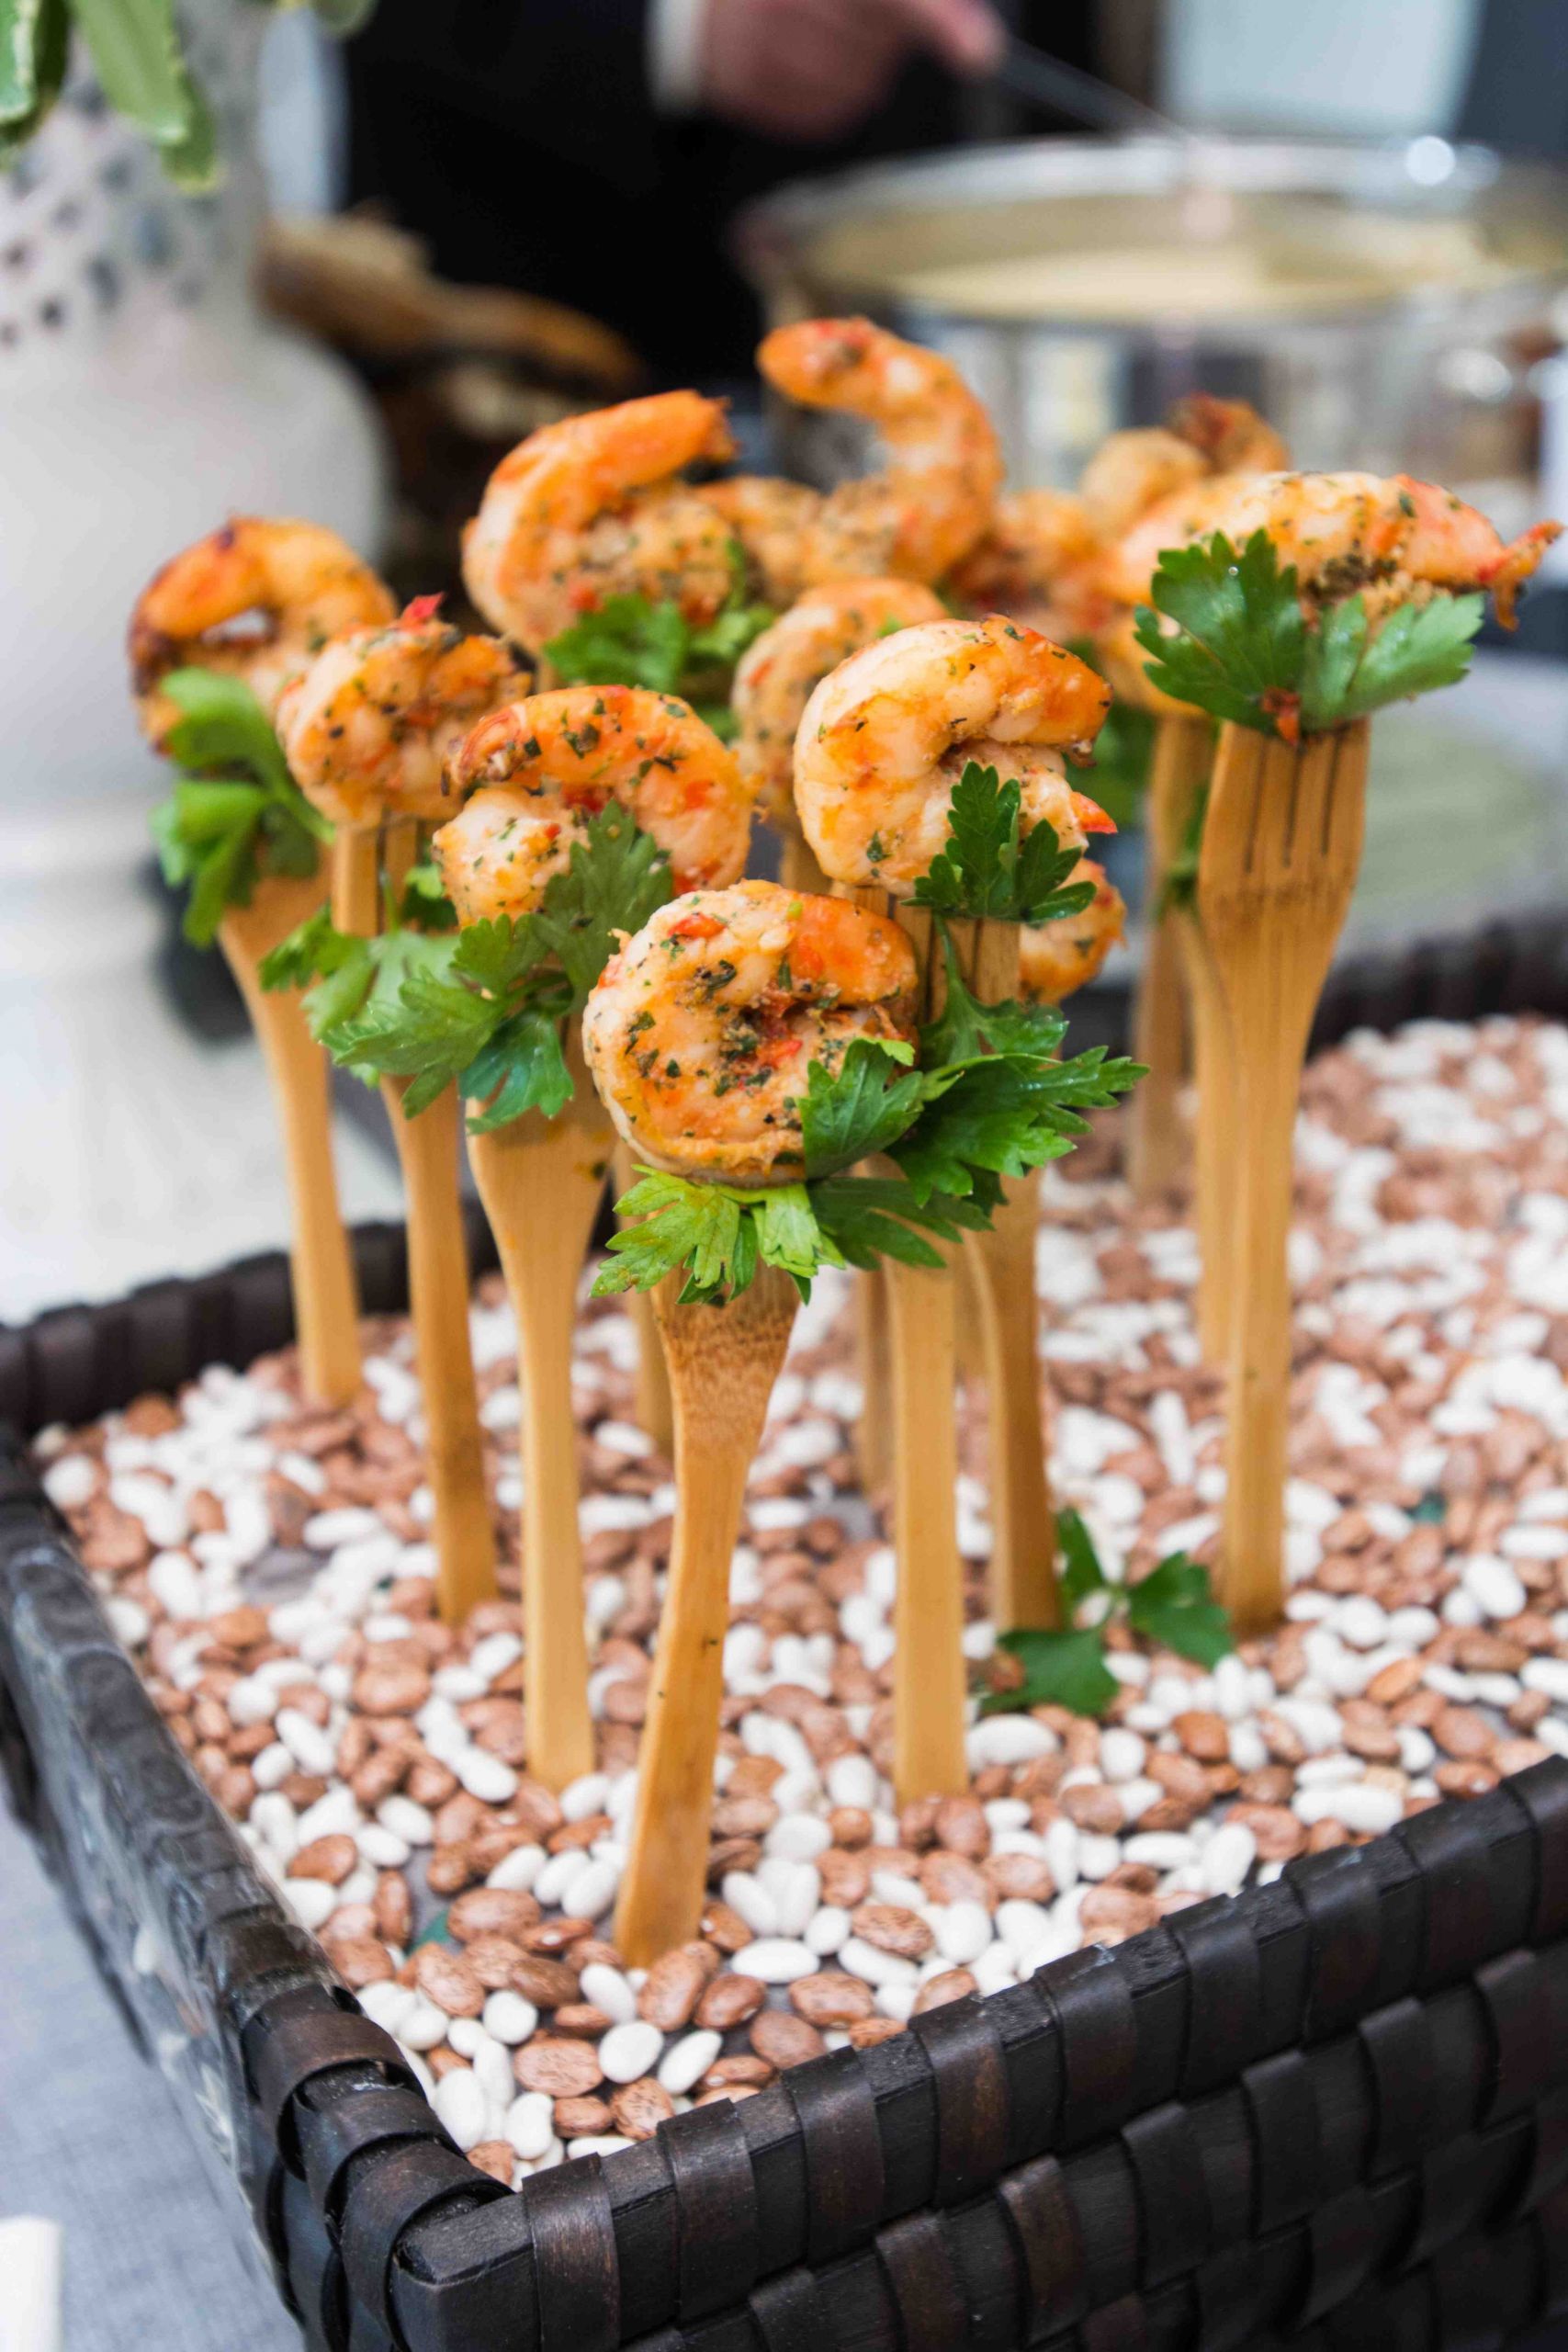 Seafood Appetizer Ideas
 Wooden forks were displayed upright on a bed of beans and